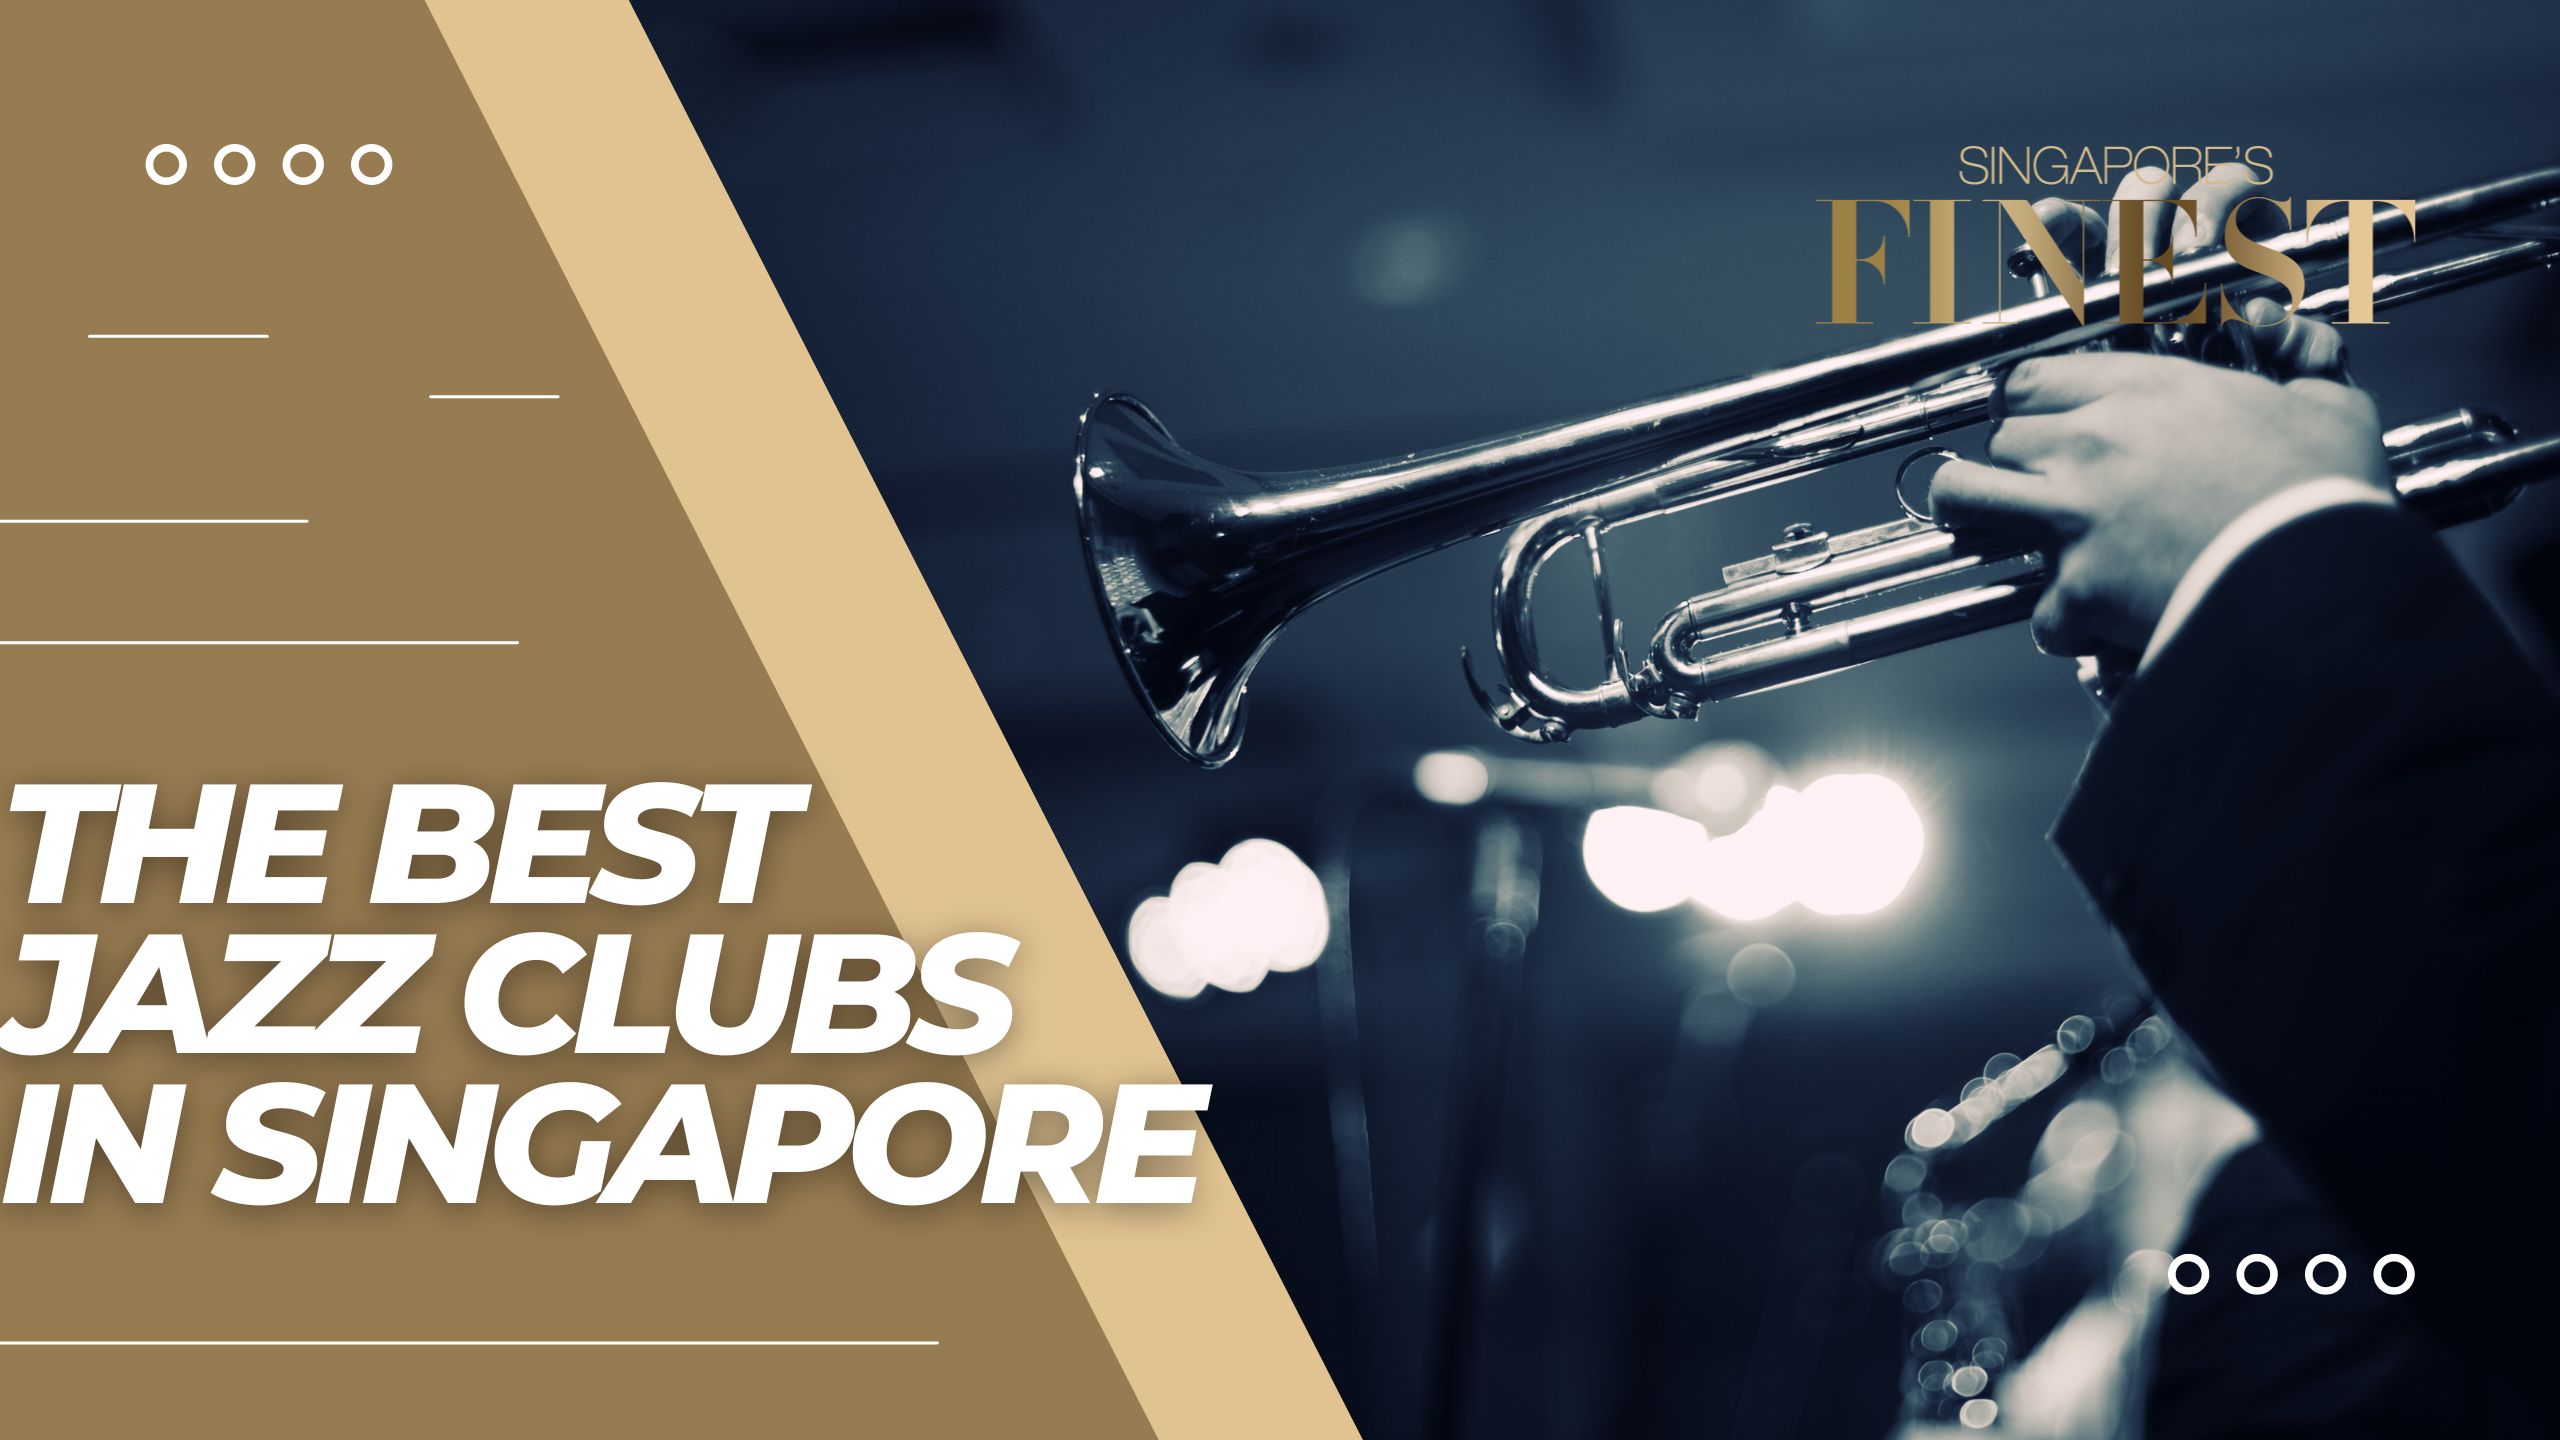 The Finest Jazz Clubs in Singapore